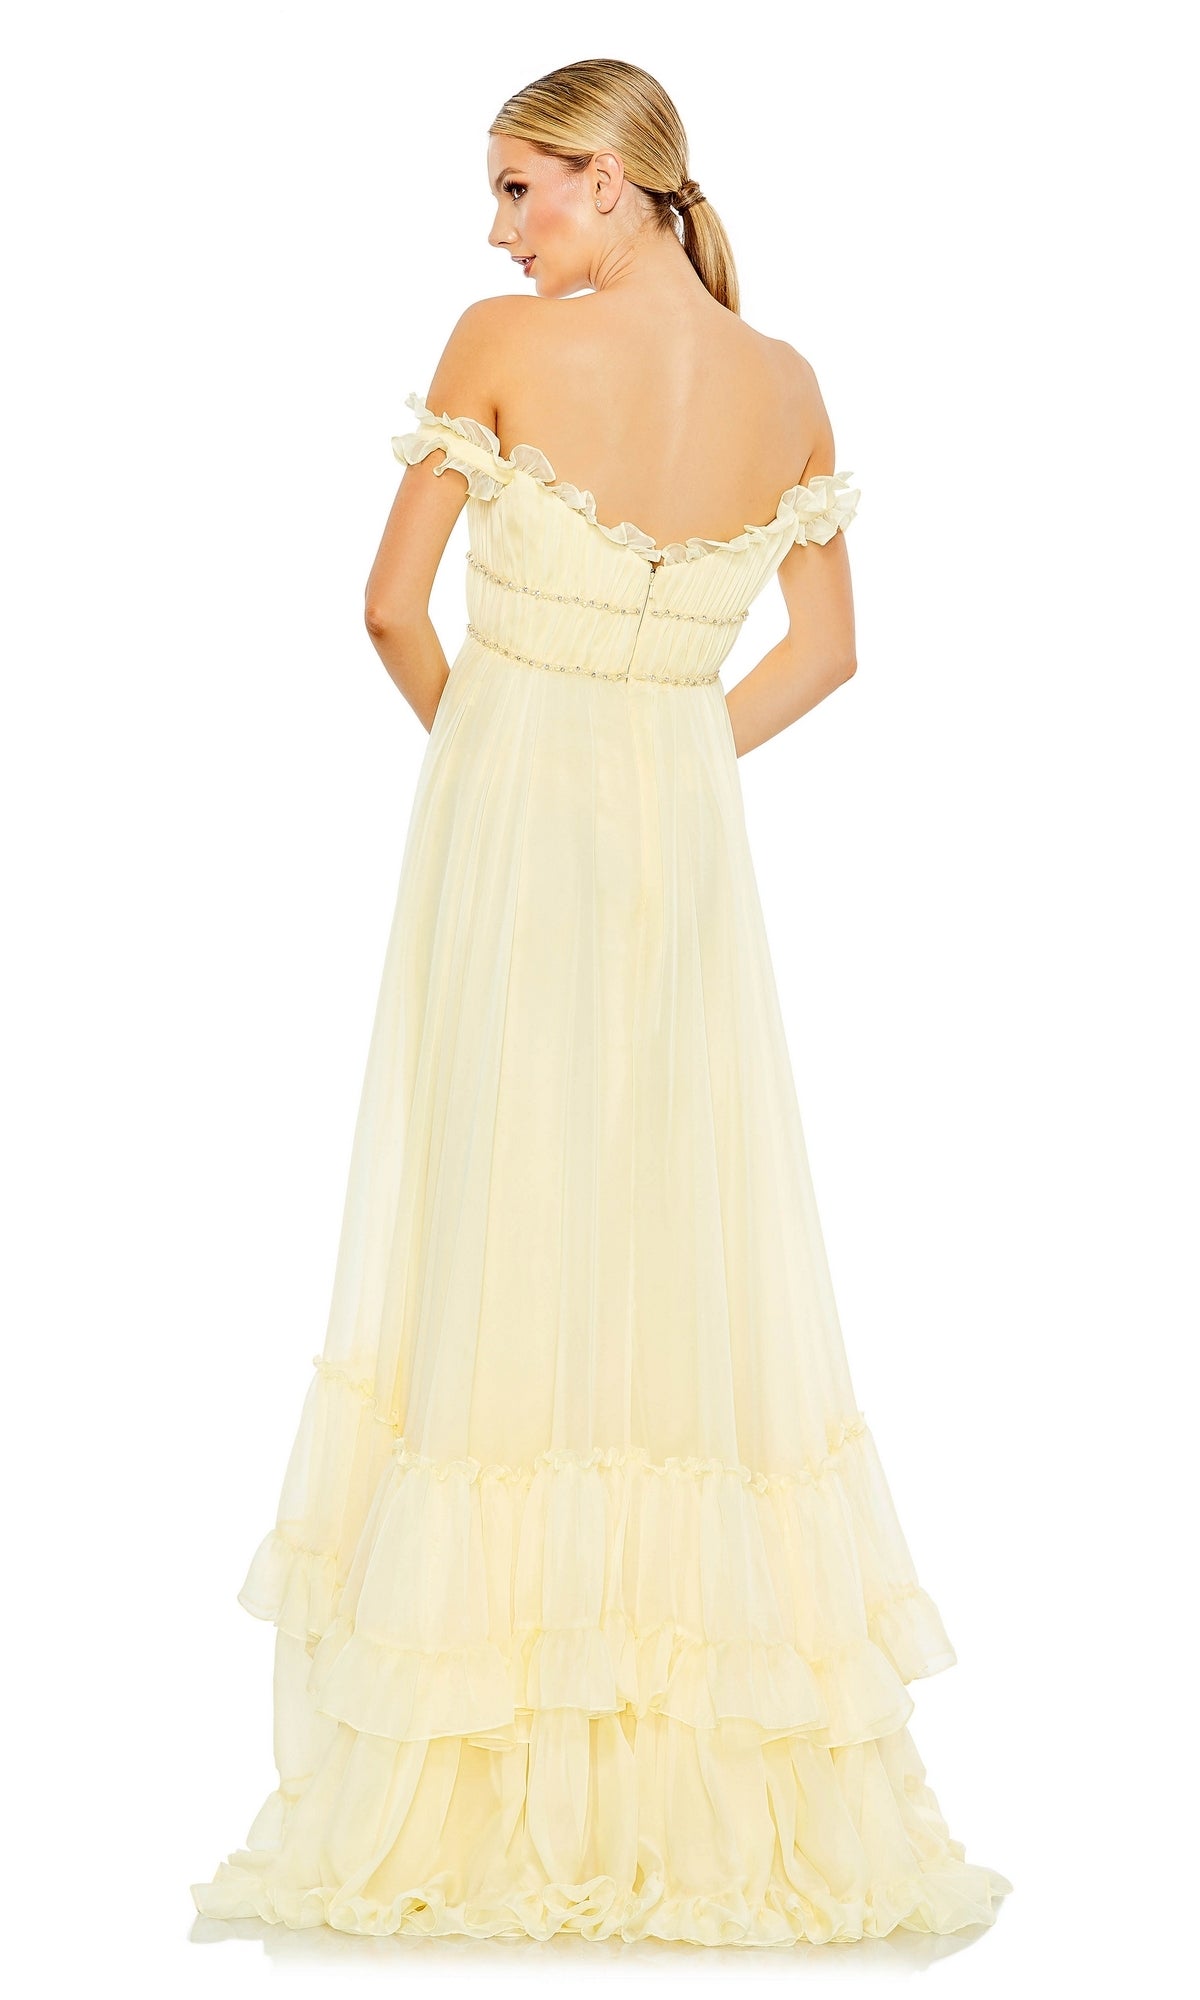 Ball Gown 3D Floral Lace Appliqued Yellow Prom Dress - VQ